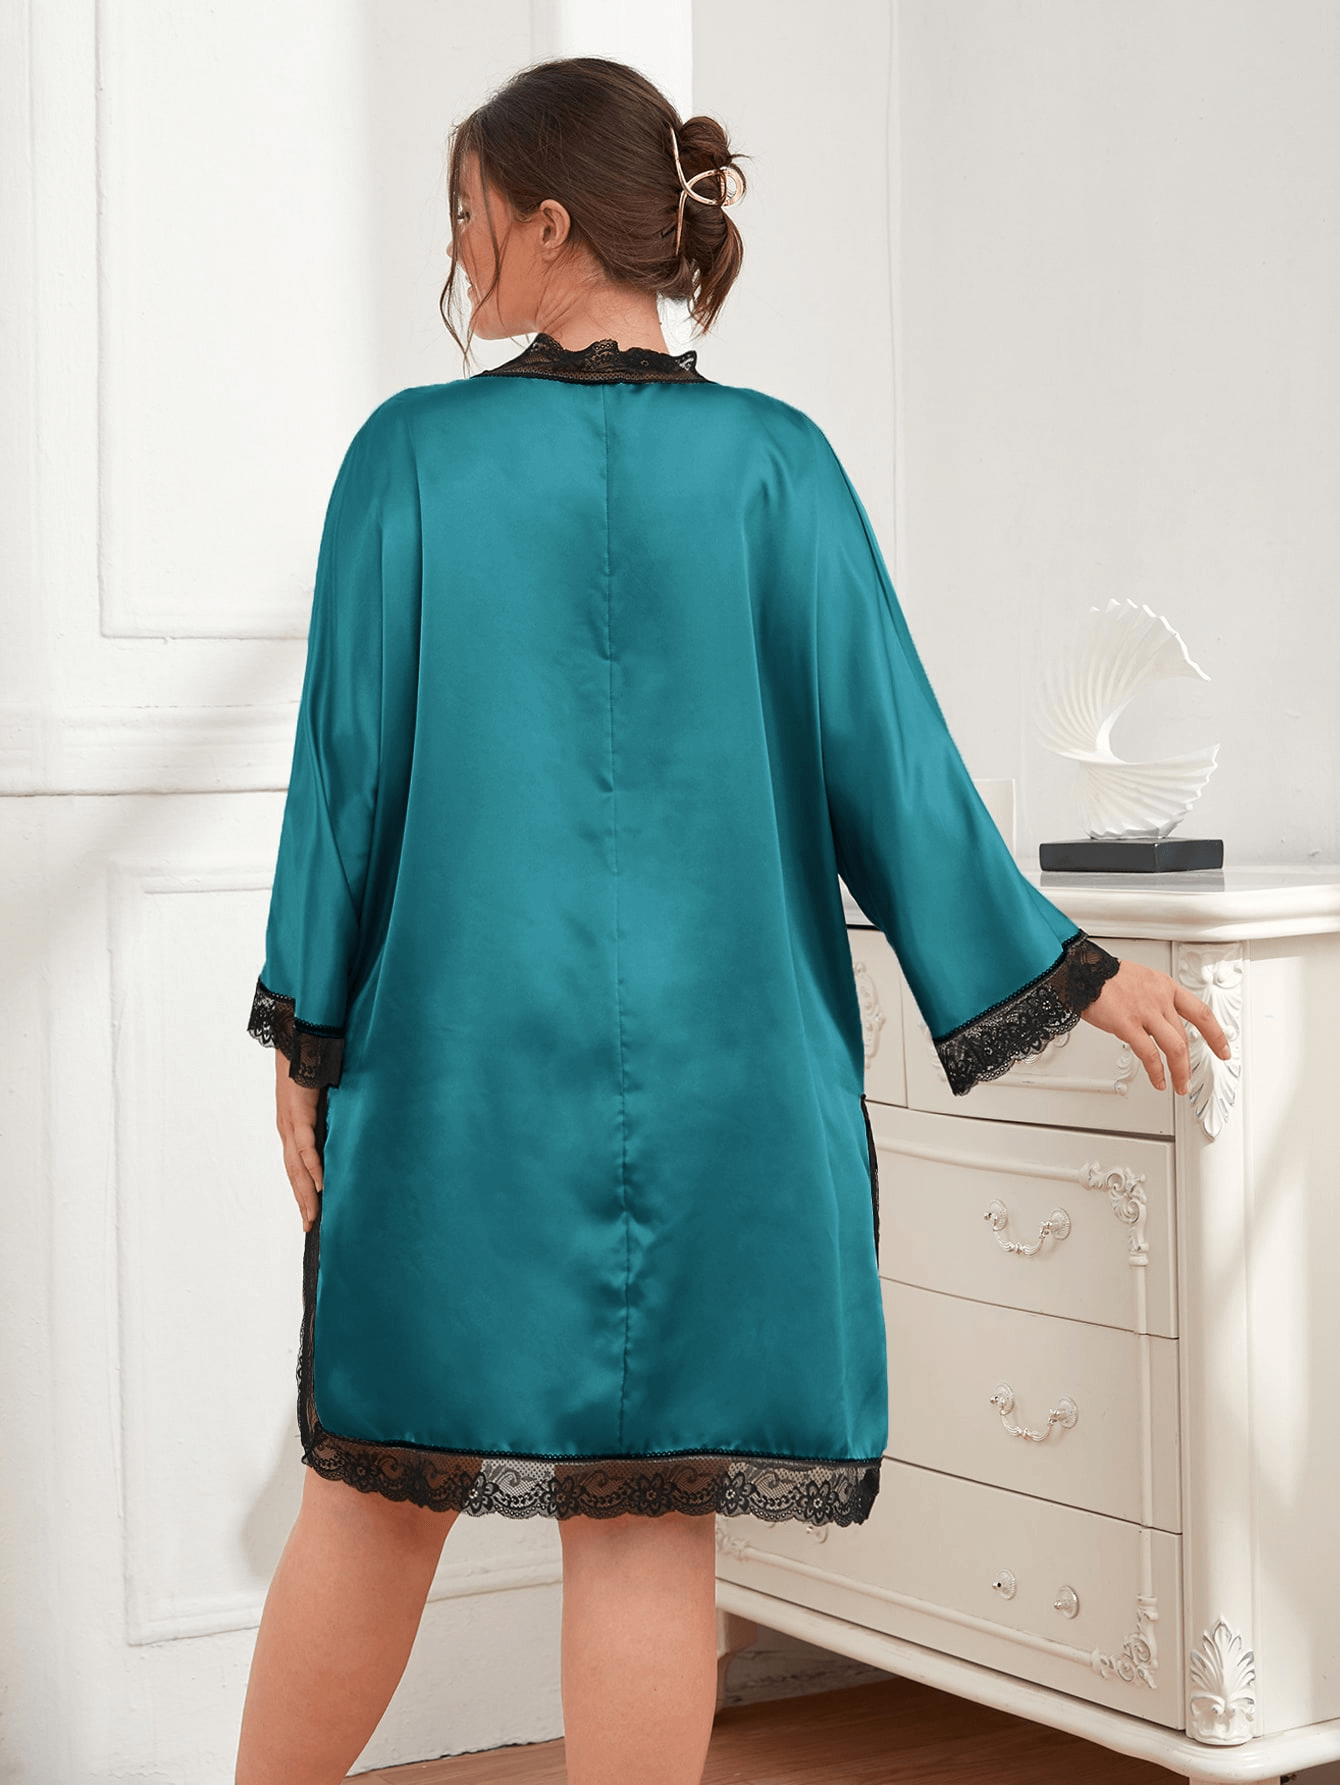 Plus Size Contrast Spliced Lace Deep V Slit Night Dress - Tophatter Deals and Online Shopping - Electronics, Jewelry, Beauty, Health, Gadgets, Fashion - Tophatter's Discounts & Offers - tophatters - tophatters.co